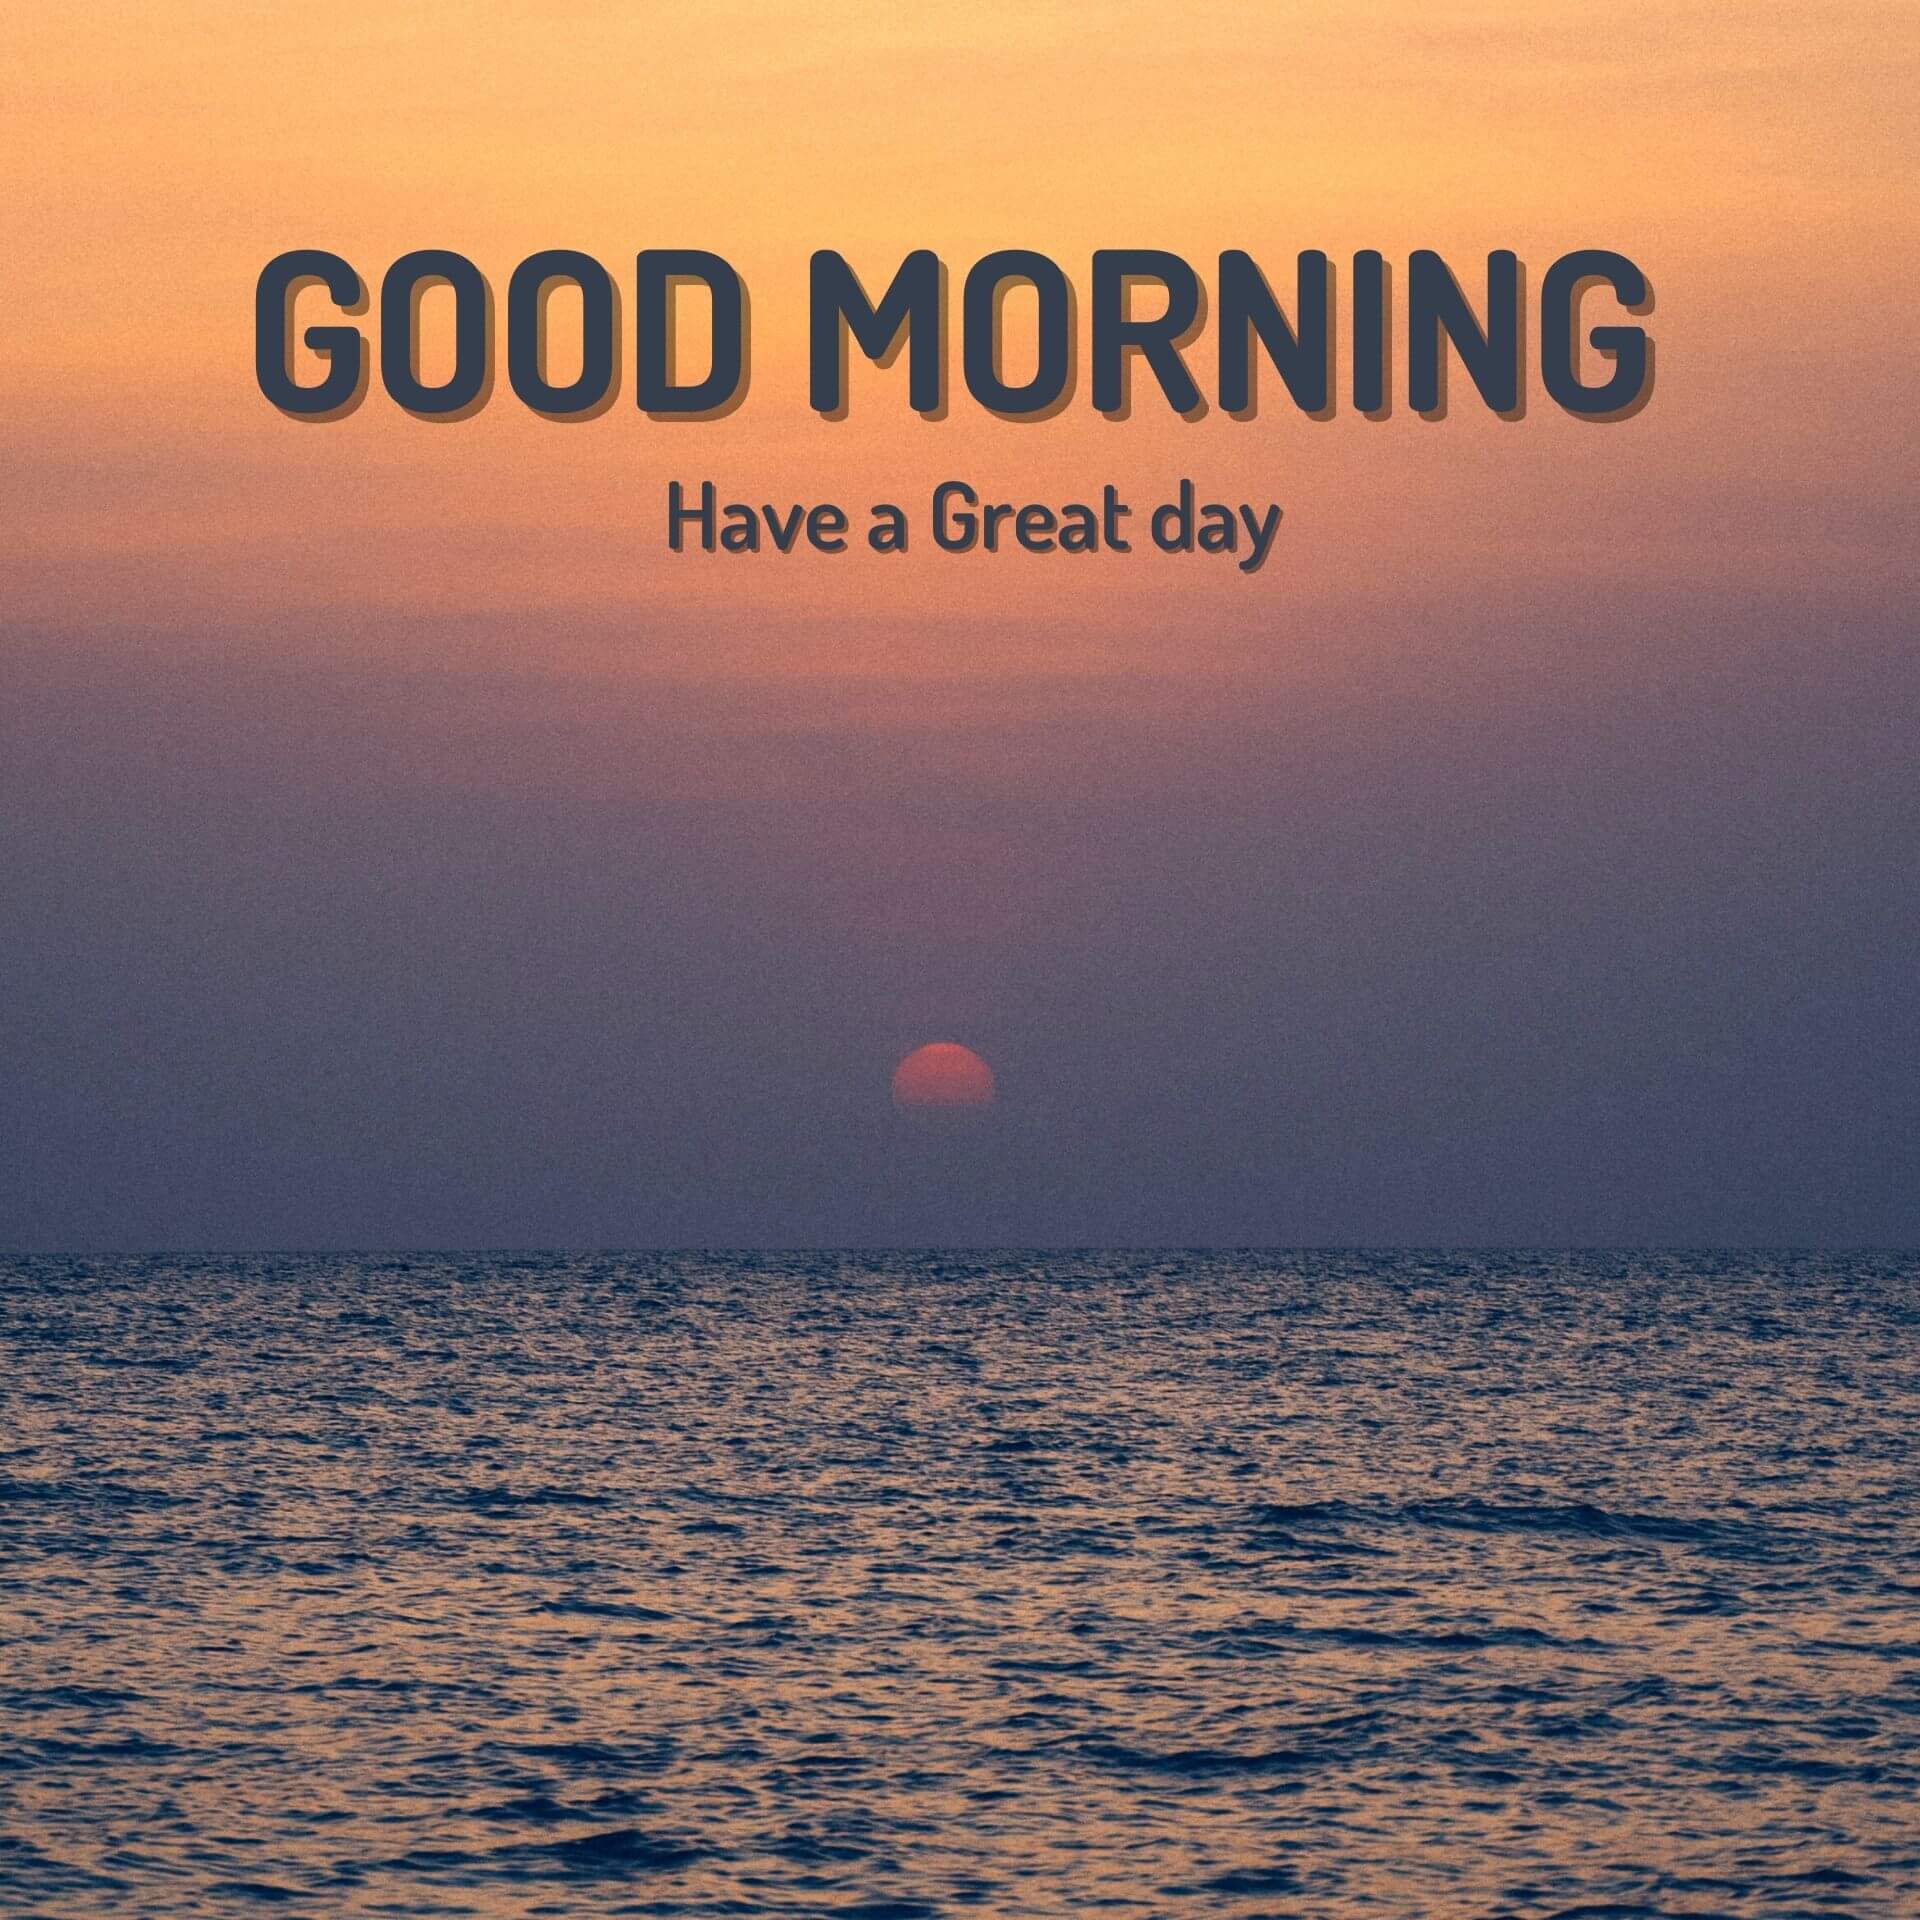 Good morning have a nice day Wallpaper New Download 2023 2